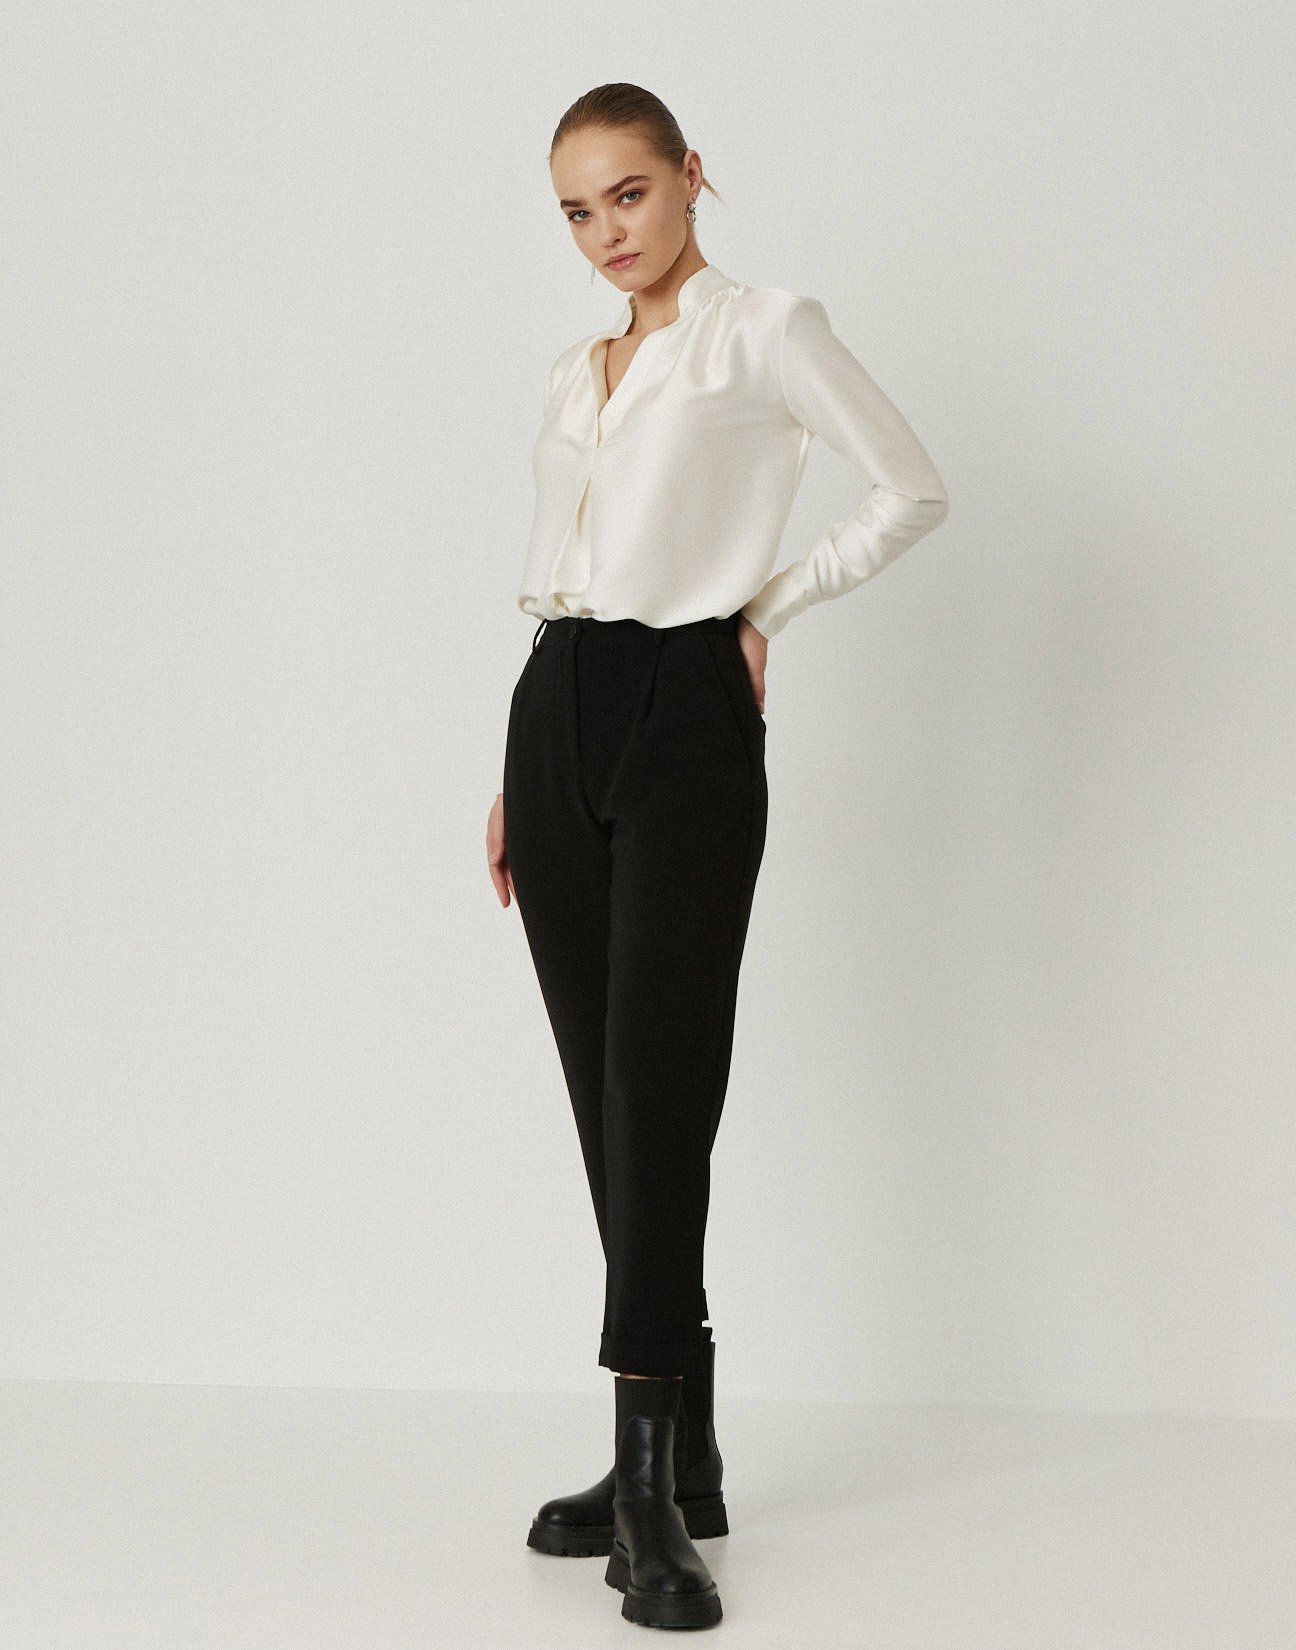 High waisted trouser with pleats